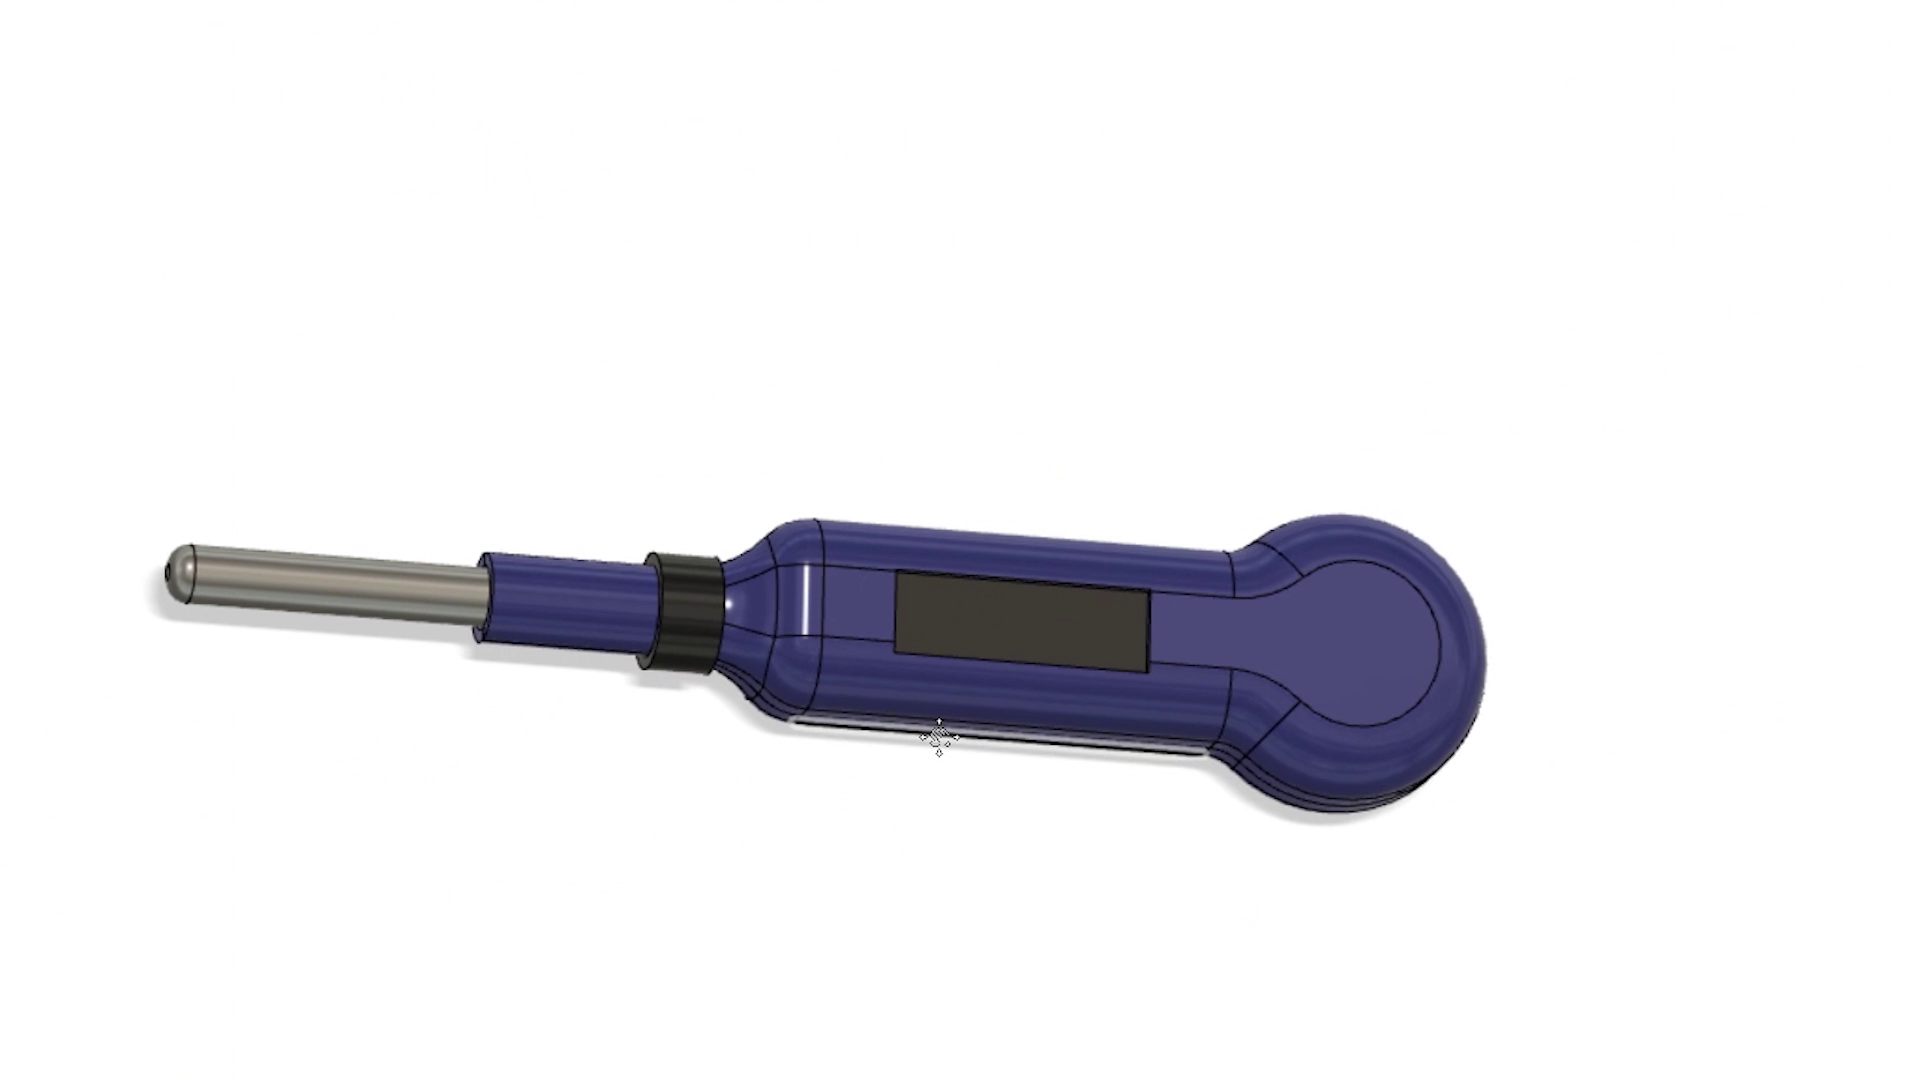 digital thermometer 3d model